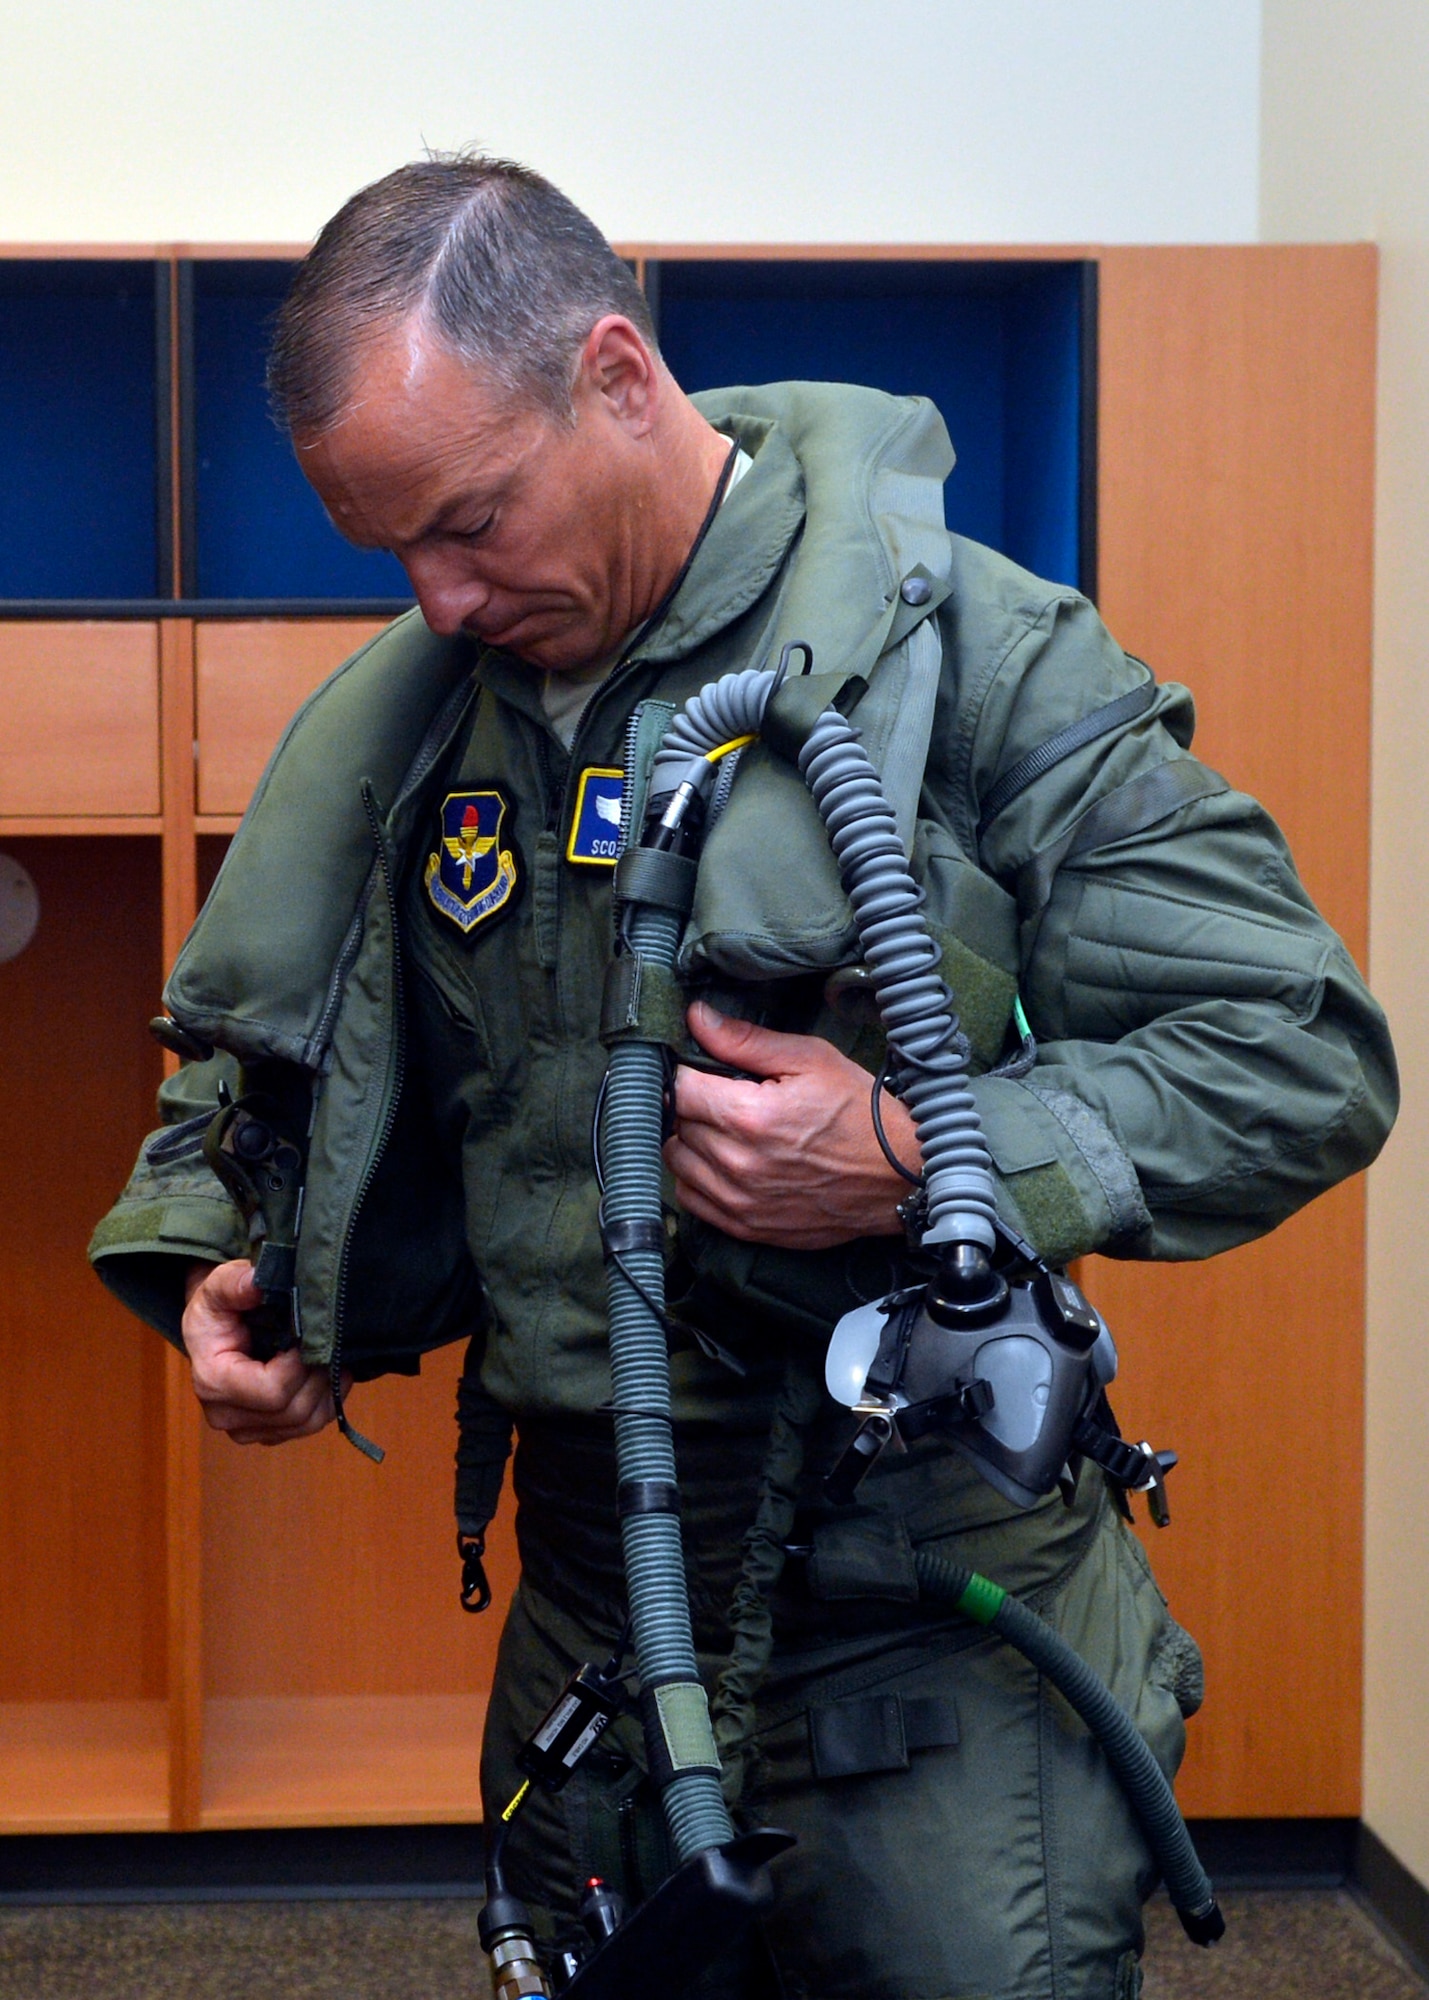 Brig. Gen. Scott Pleus, 56th Fighter Wing commander, suits up for his first F-35 sortie flight at Luke Air Force Base, Arizona, March 18, 2015. Pleus has been flying the F-16 for 22 years. (U.S. Air Force photo/Senior Airman Devante Williams)